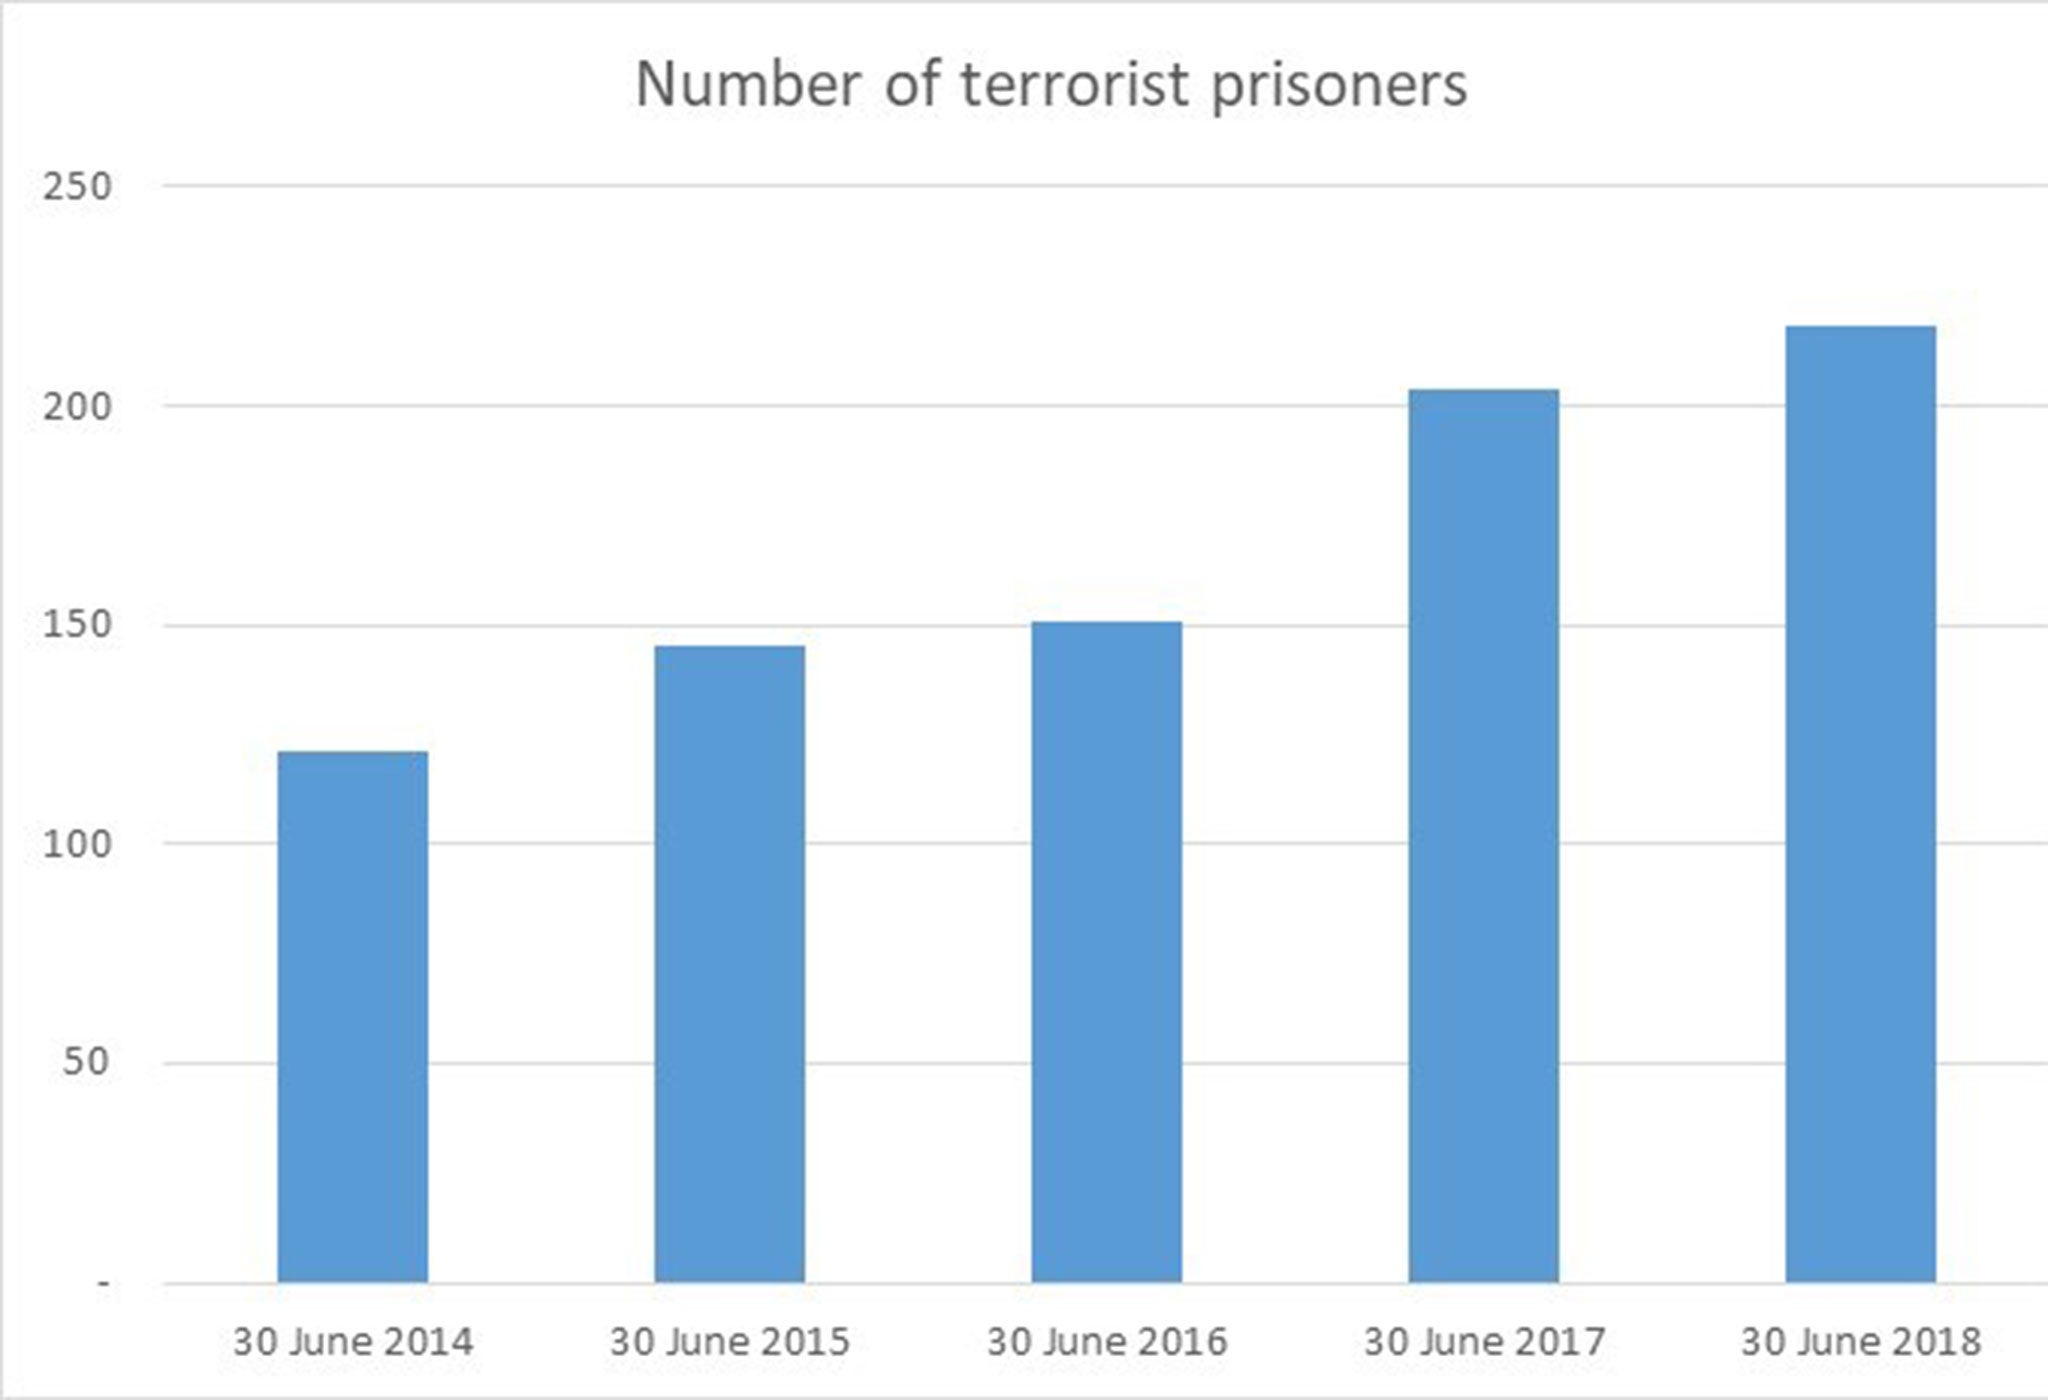 A record number of terrorist prisoners are currently imprisoned in British jails (Source: HM Prison and Probation Service and Scottish Prisons Service)